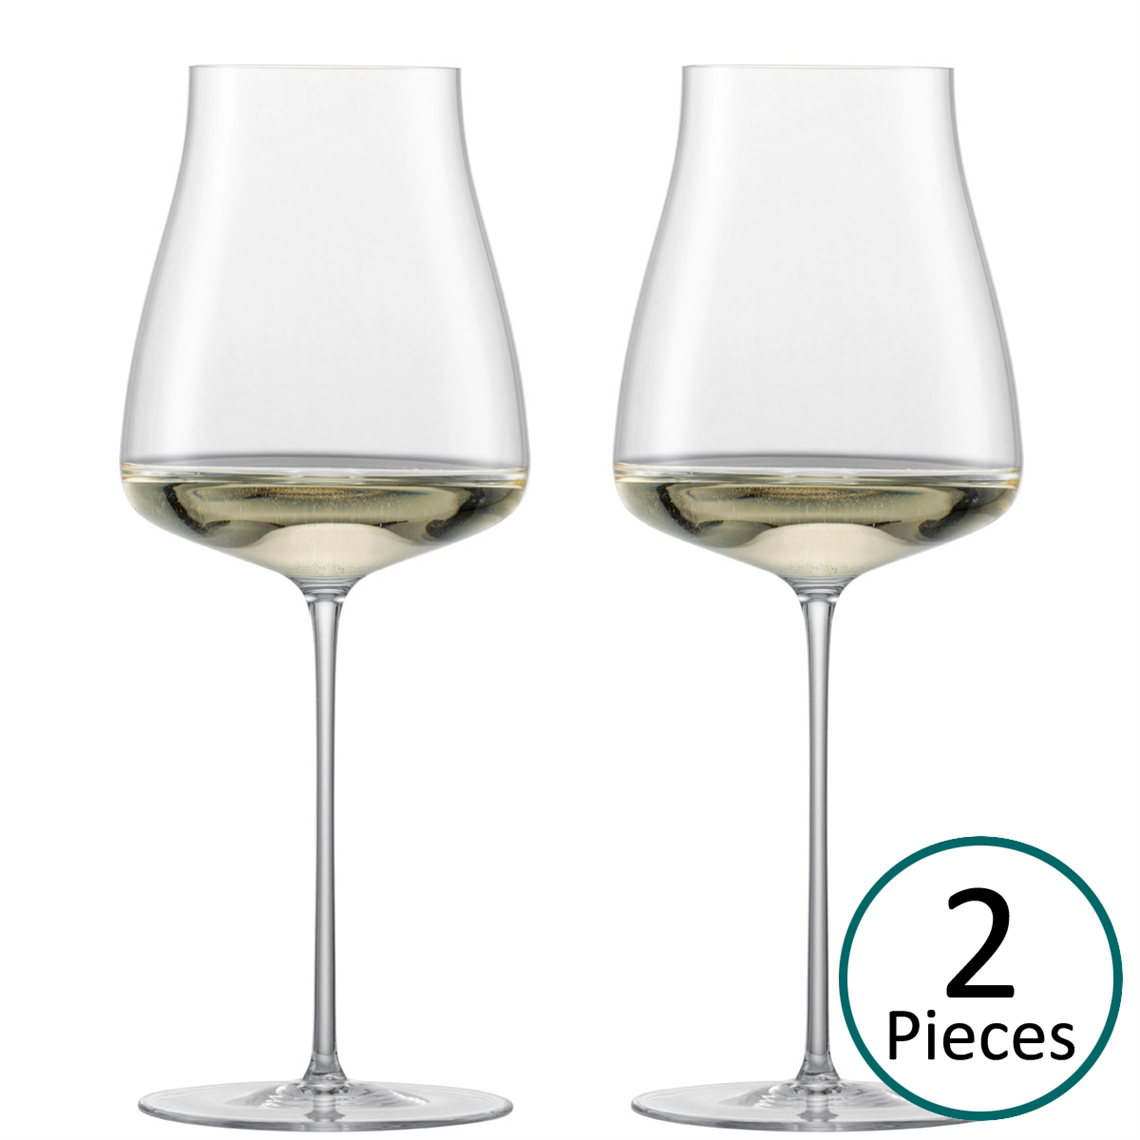 Zwiesel 1872 The Moment Tasting / Riesling Grand Cru Glass - Set of 2